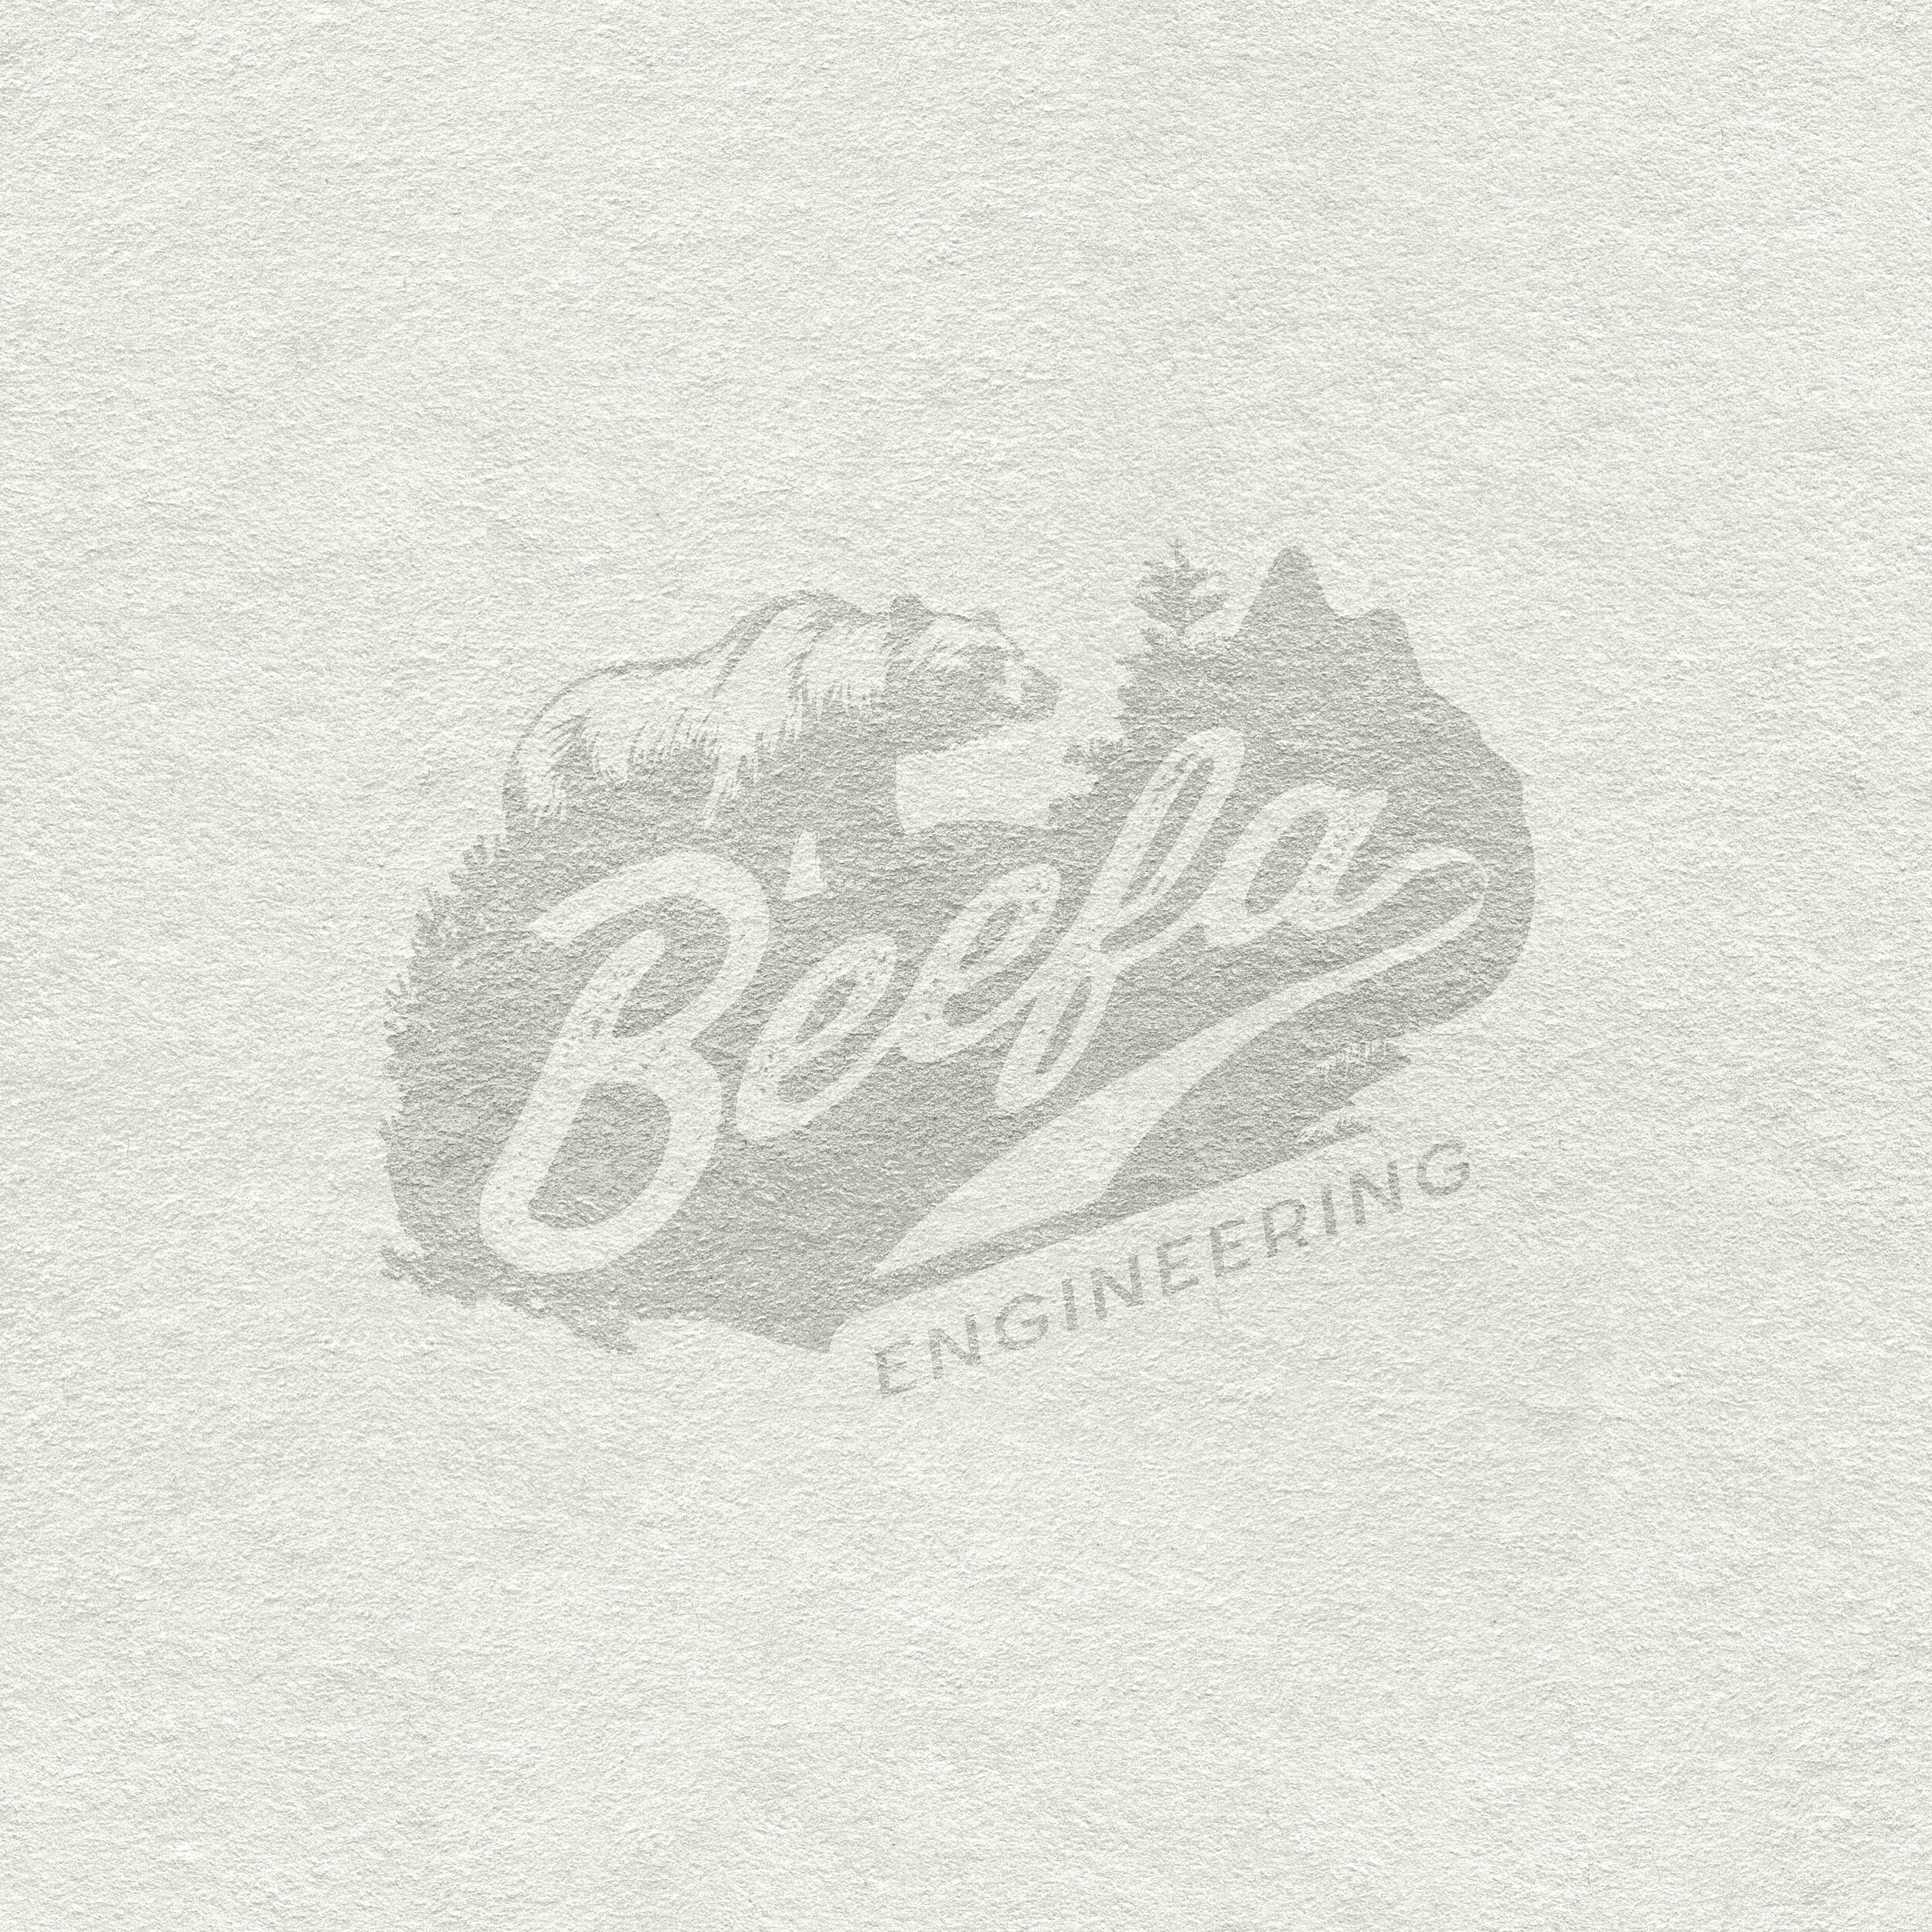 Safe to say we're a bit inlove with the alternative and graphic options in this one 🌝 Full reveal coming soon! 
#sneakpeek @beefaengineering 

-
-
-
-

#comingsoon #logodesigns #logodesigner #graphicdesigndaily